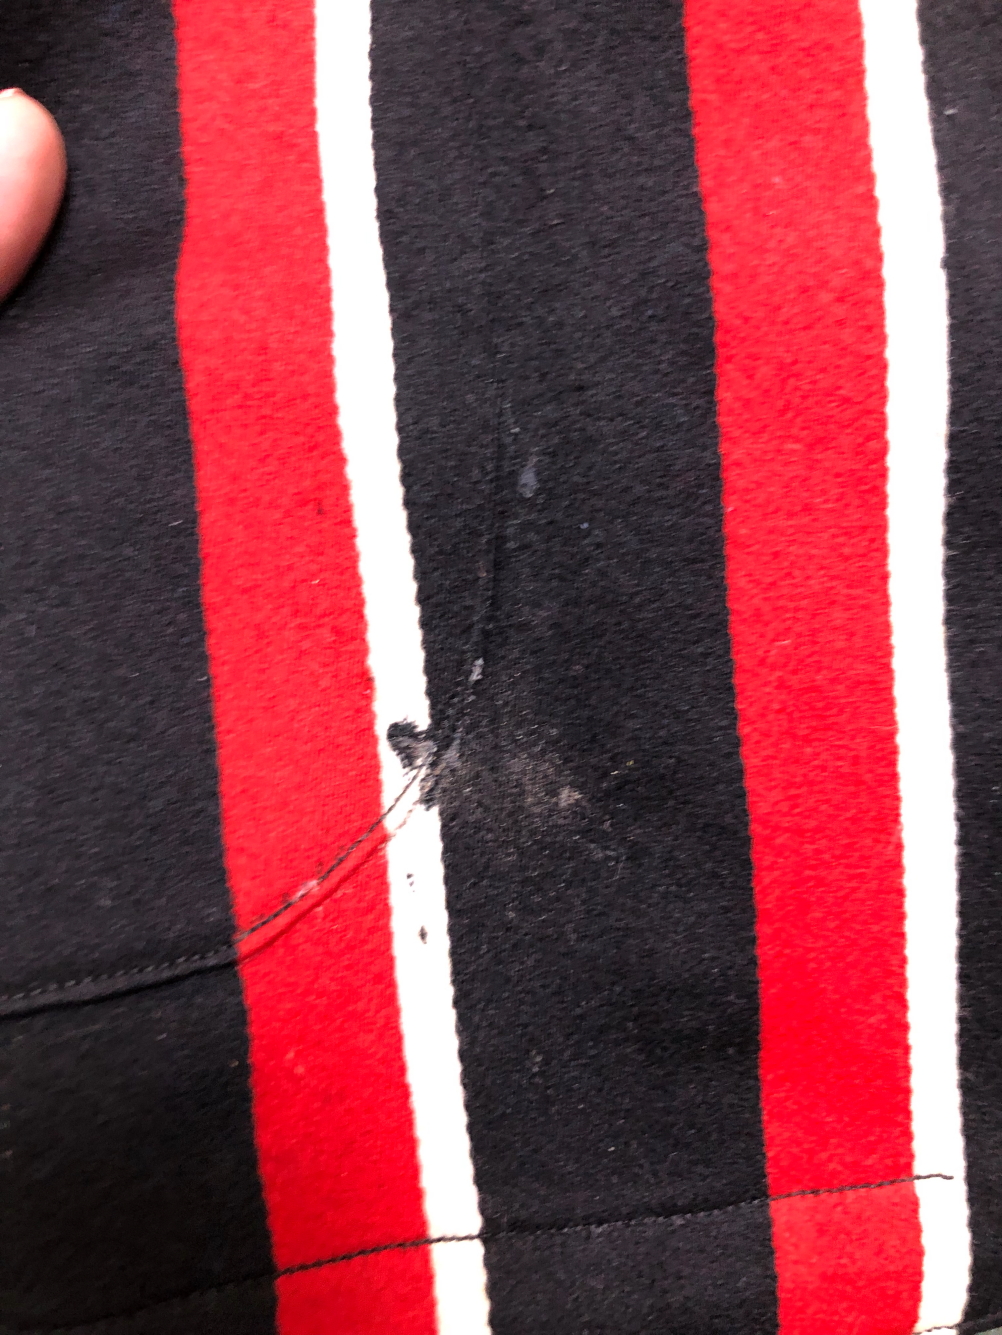 BLAZER. A MANS RED, BLACK AND WHITE BOATING BLAZER WITH ARMORIAL ON THE POCKET. PIT TO PIT 46cms, - Image 8 of 10